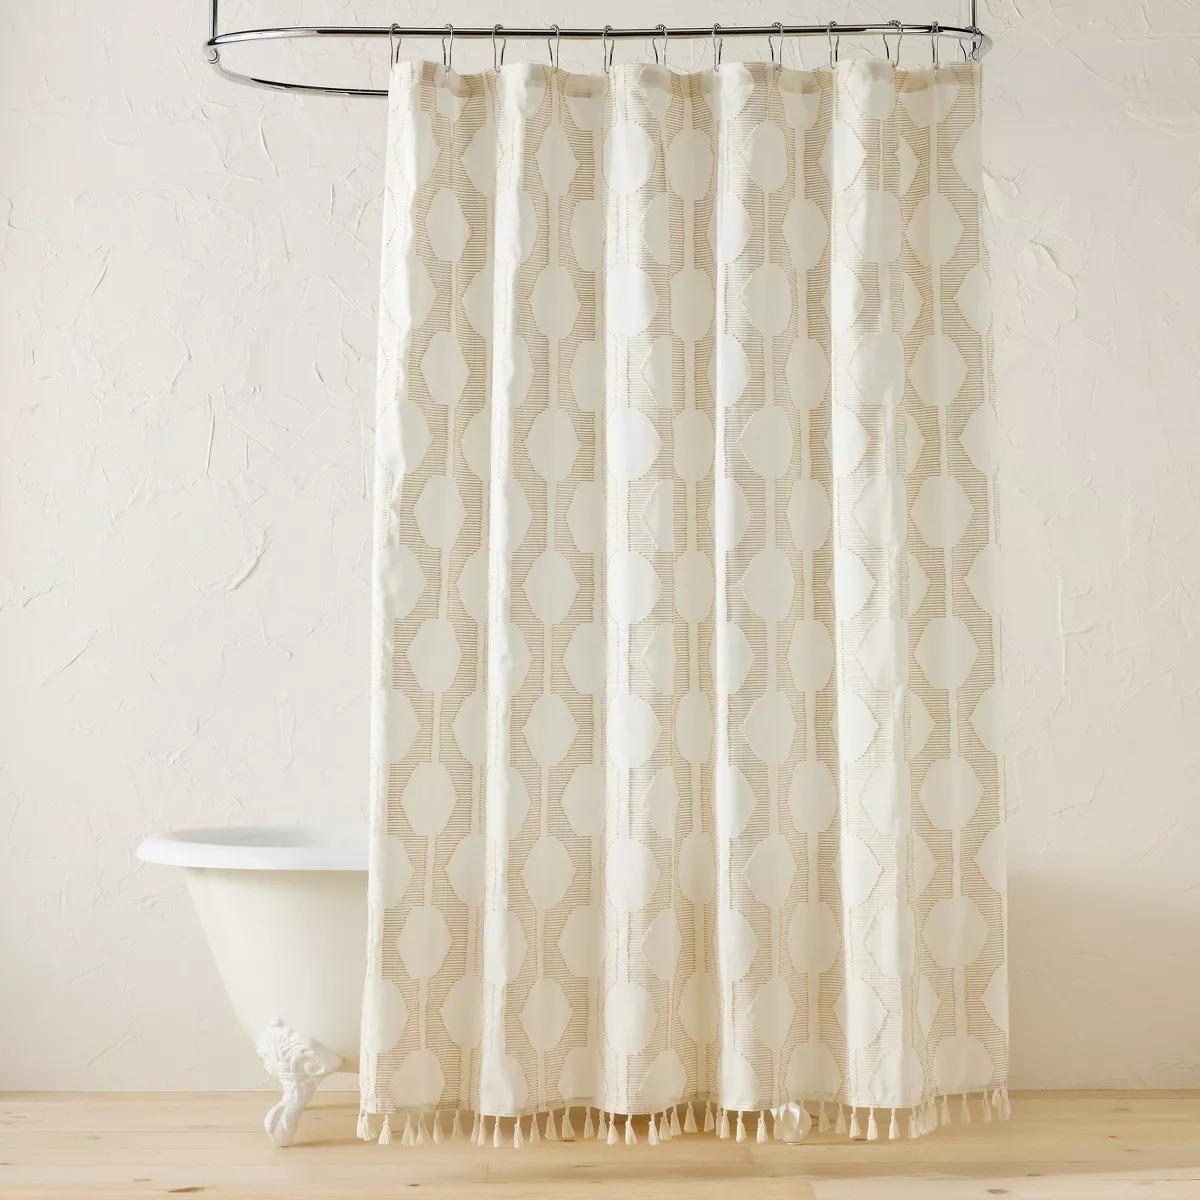 Shower curtain with geometric pattern and fringe displayed in a bathroom setting for a shopping article